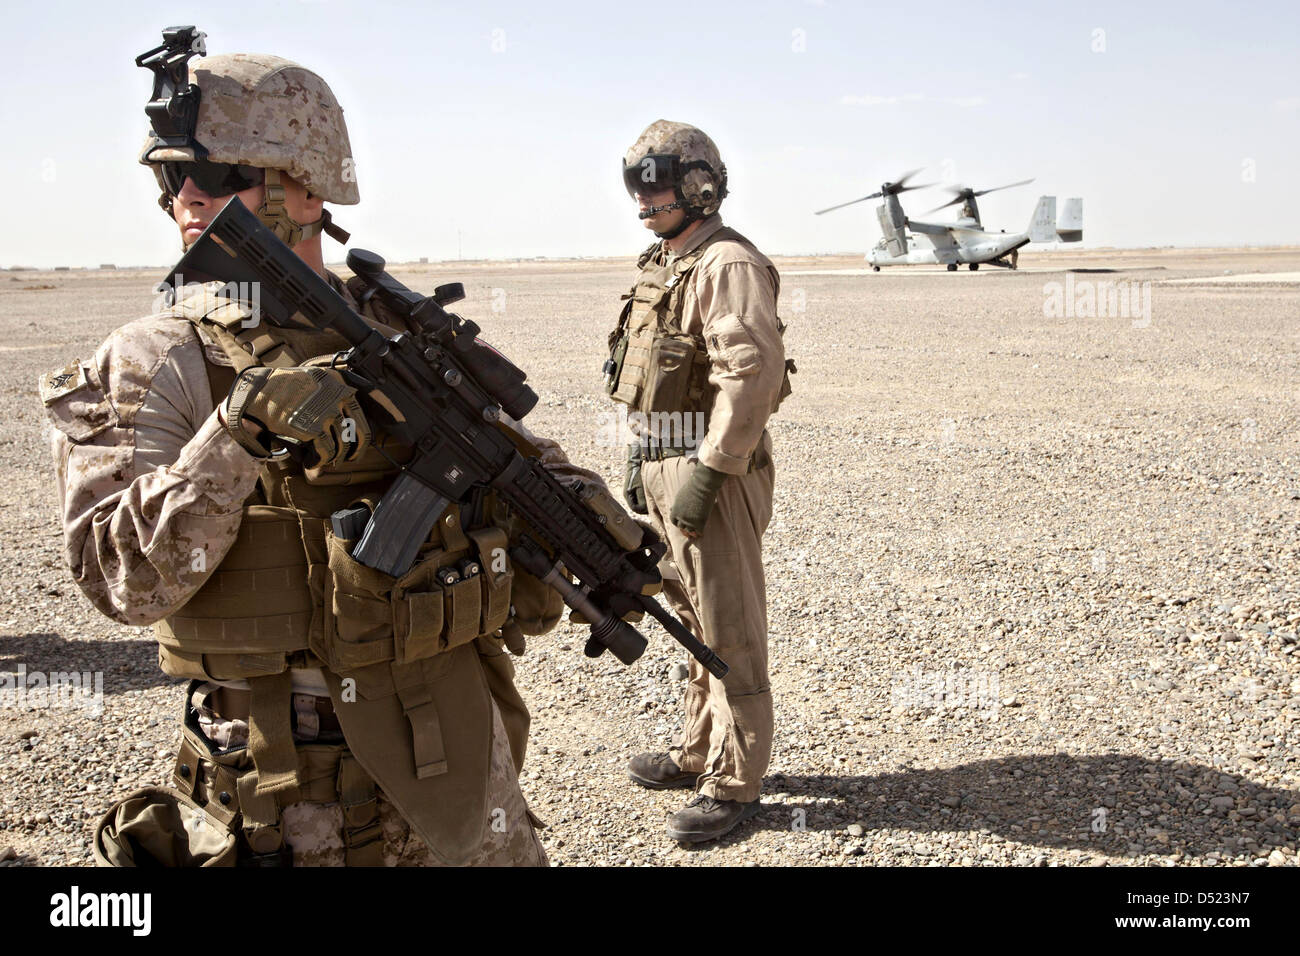 US Marines prepare to board an MV-22 Osprey helicopter March 16, 2013 at Camp Dwyer, Helmand Province, Afghanistan. Stock Photo